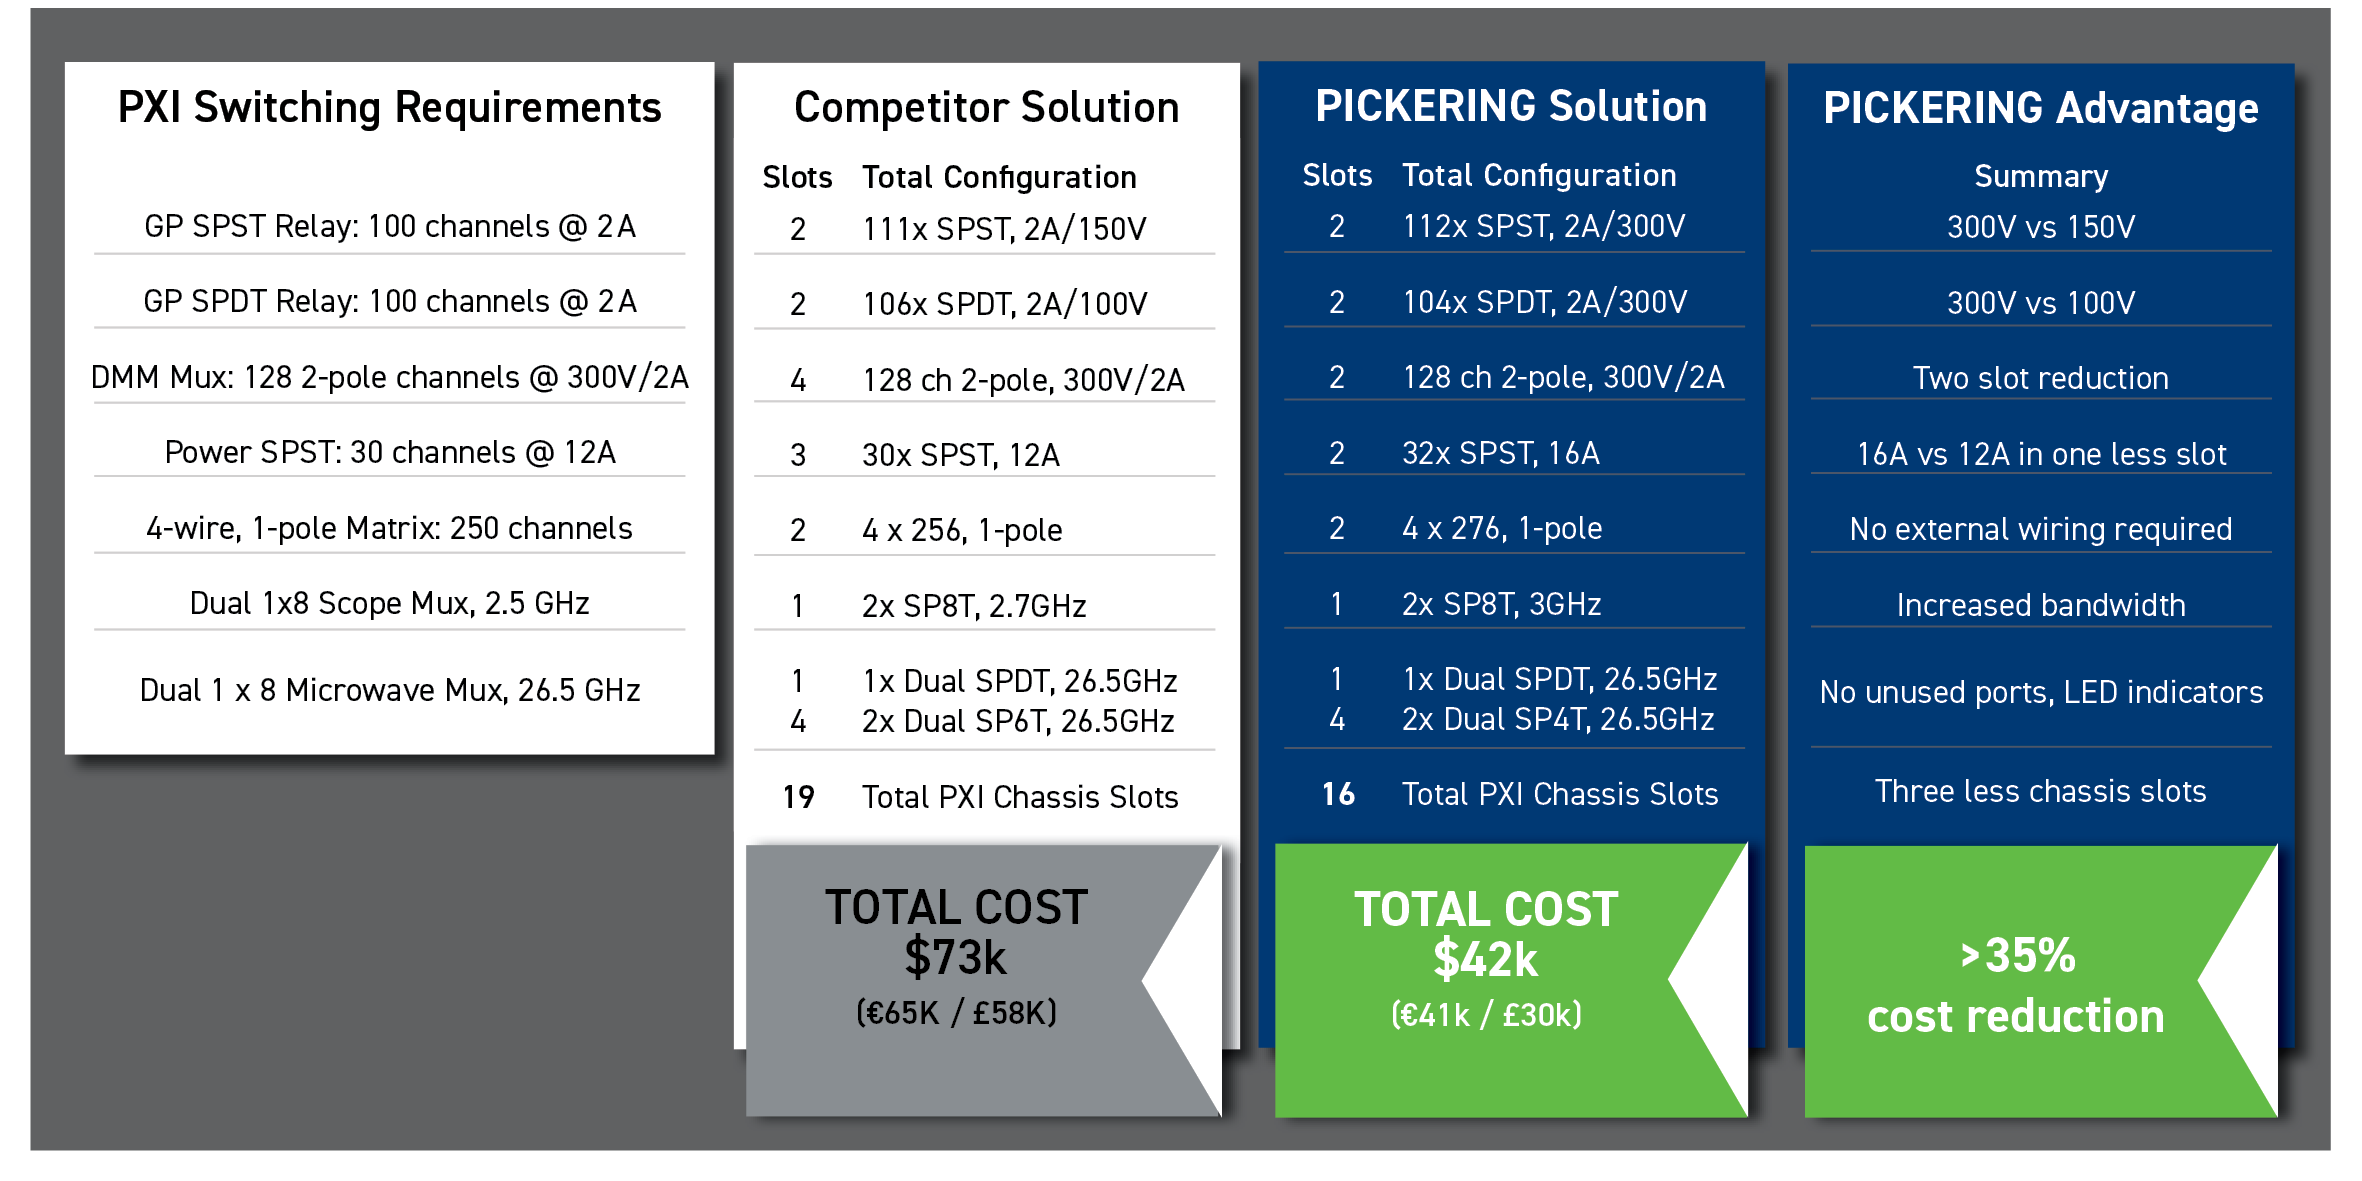 PXI switching subsystem savings from Pickering